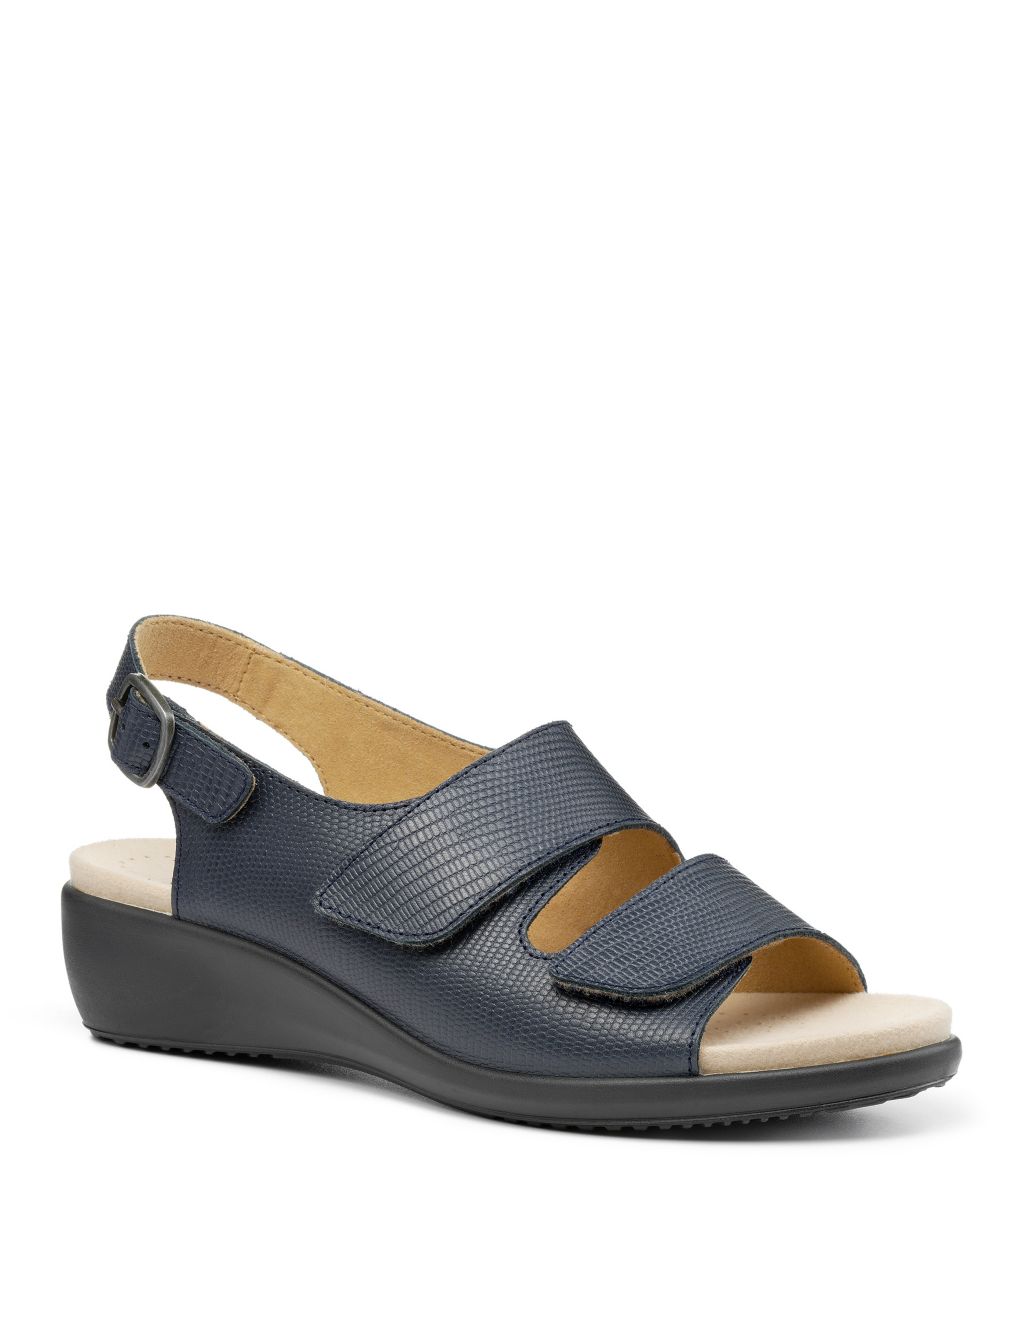 Easy II Wide Fit Leather Wedge Sandals image 2